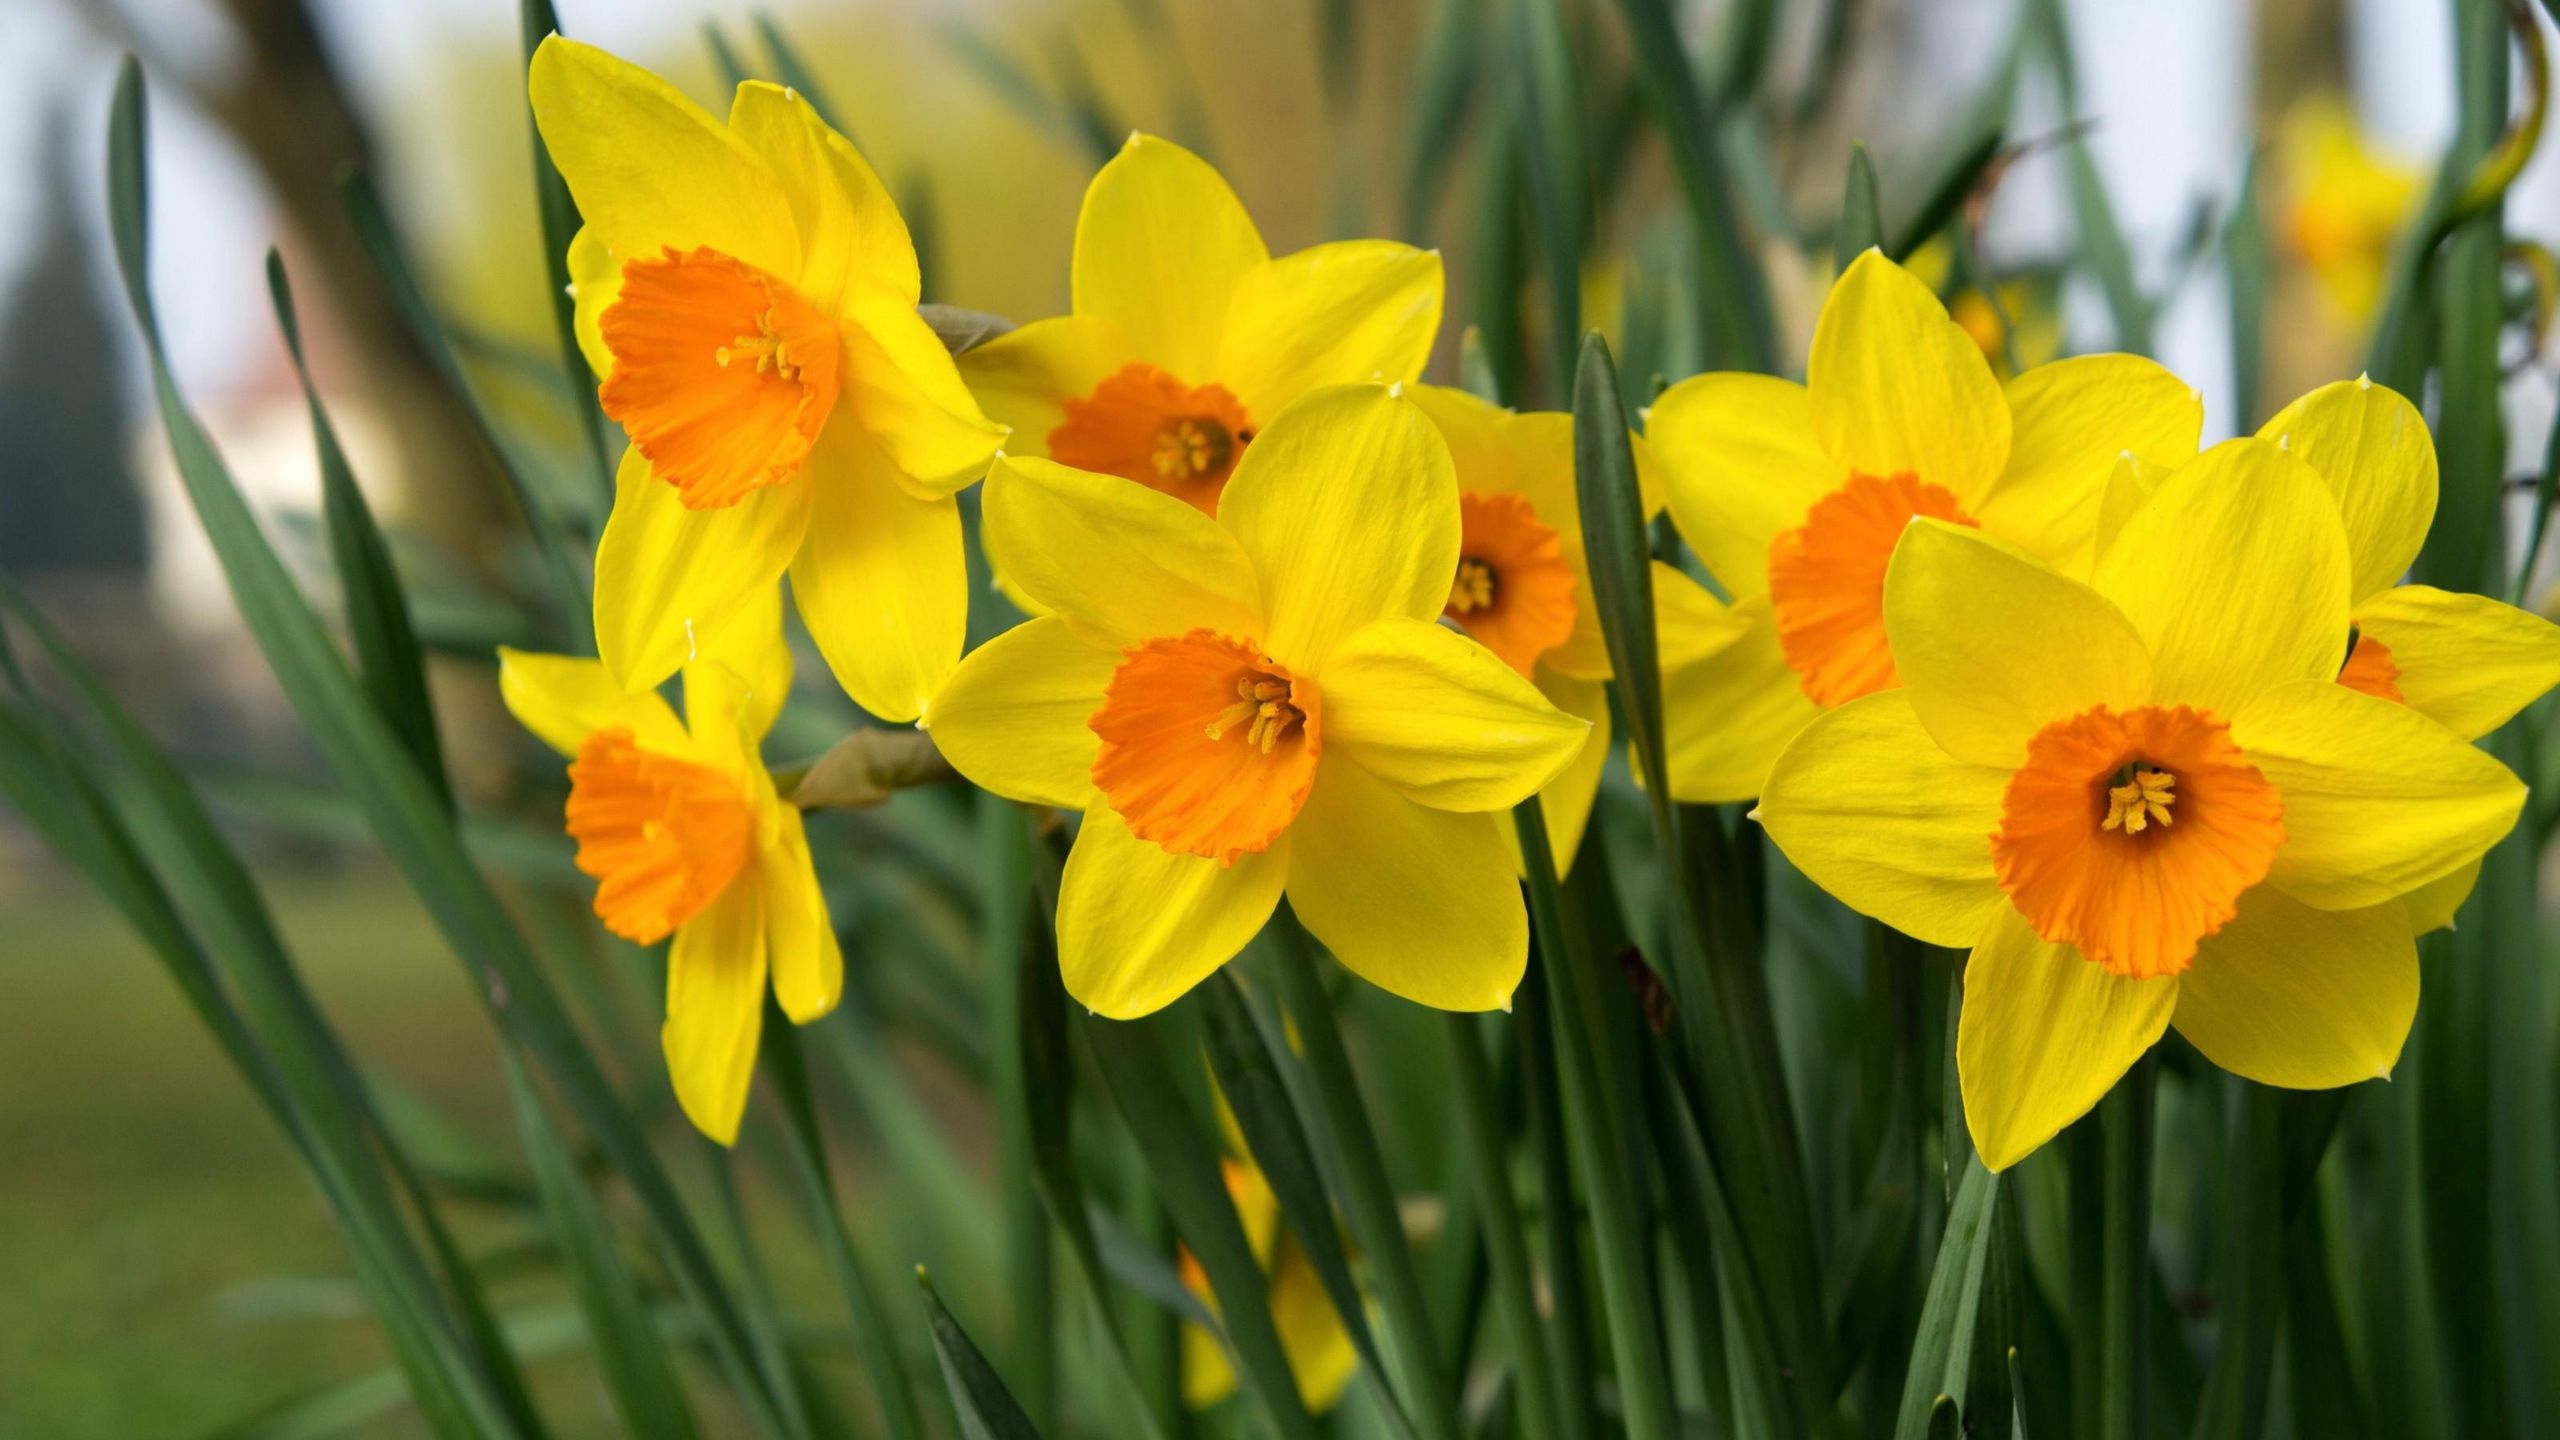 Download wallpaper 2560x1440 daffodils, flowers, bright, flowerbed, spring widescreen 16:9 HD background